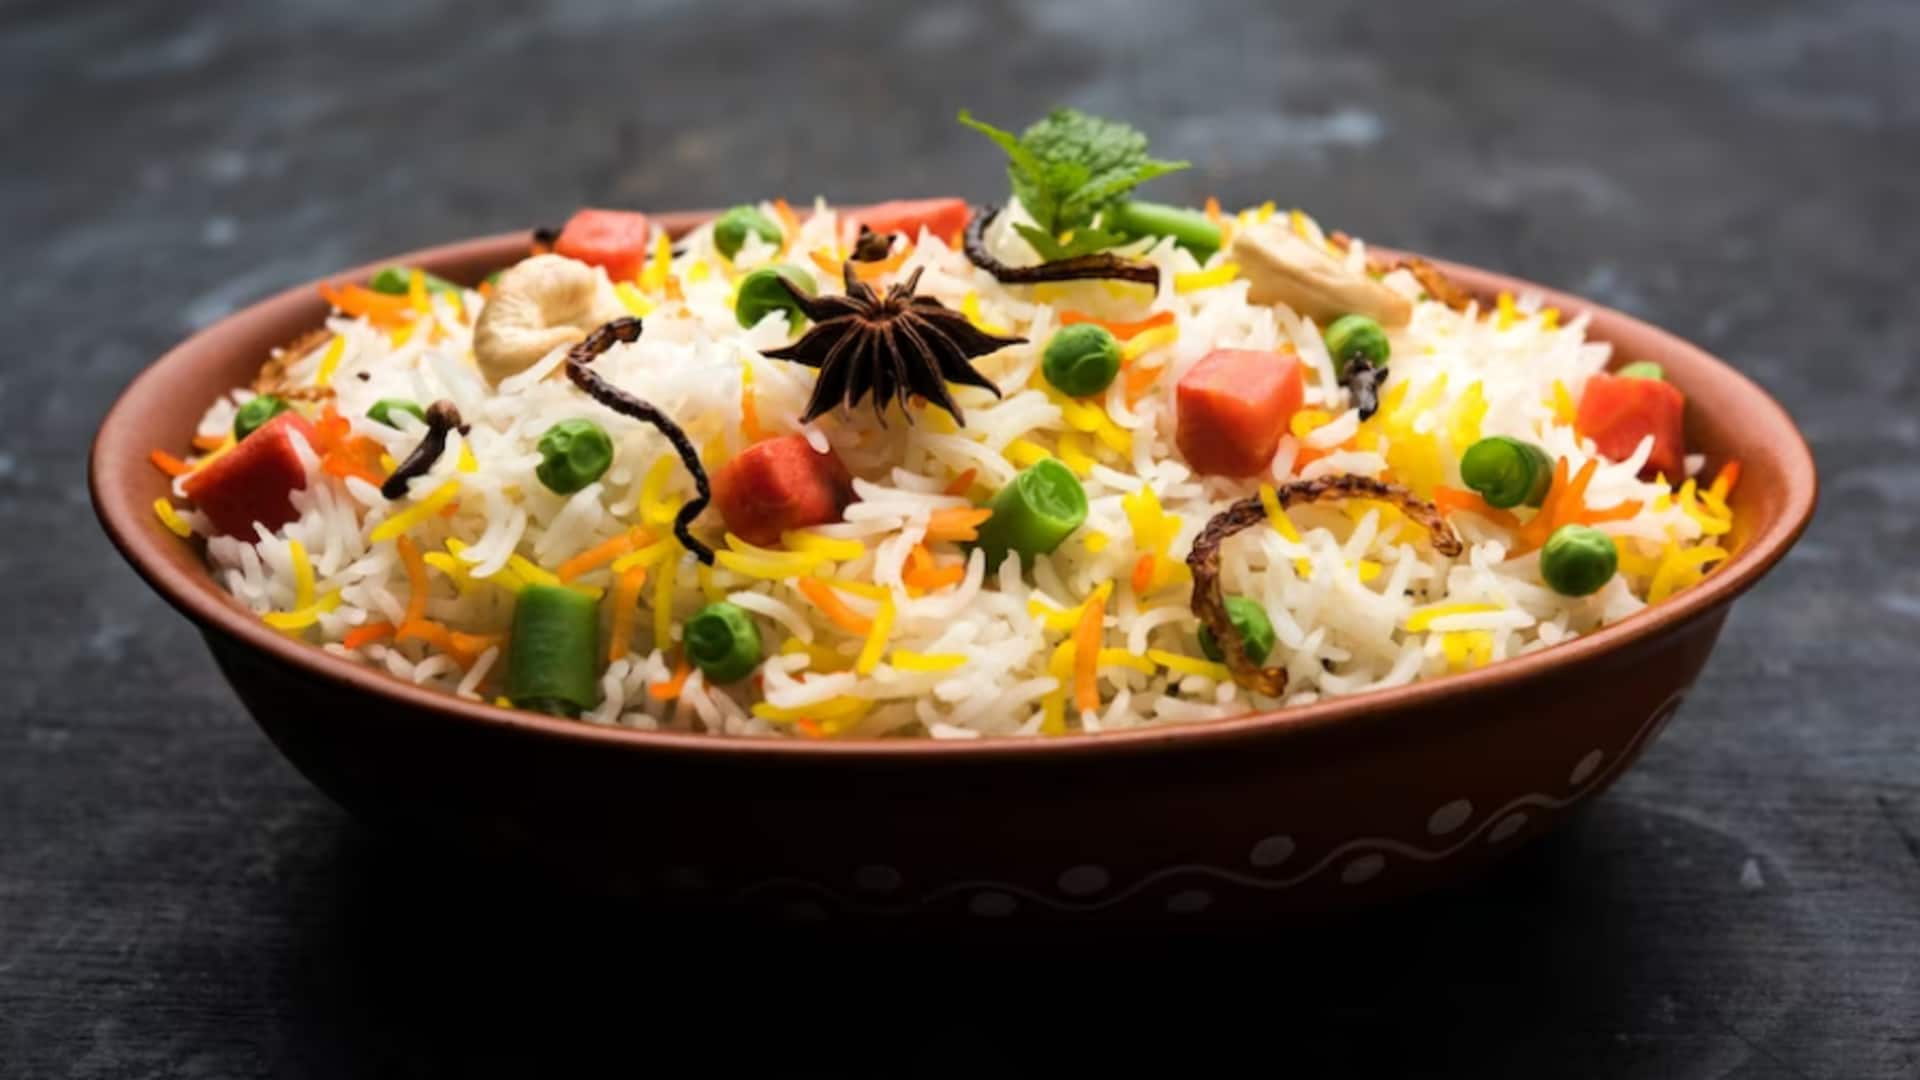 Impress your guests with this vegetable biryani recipe